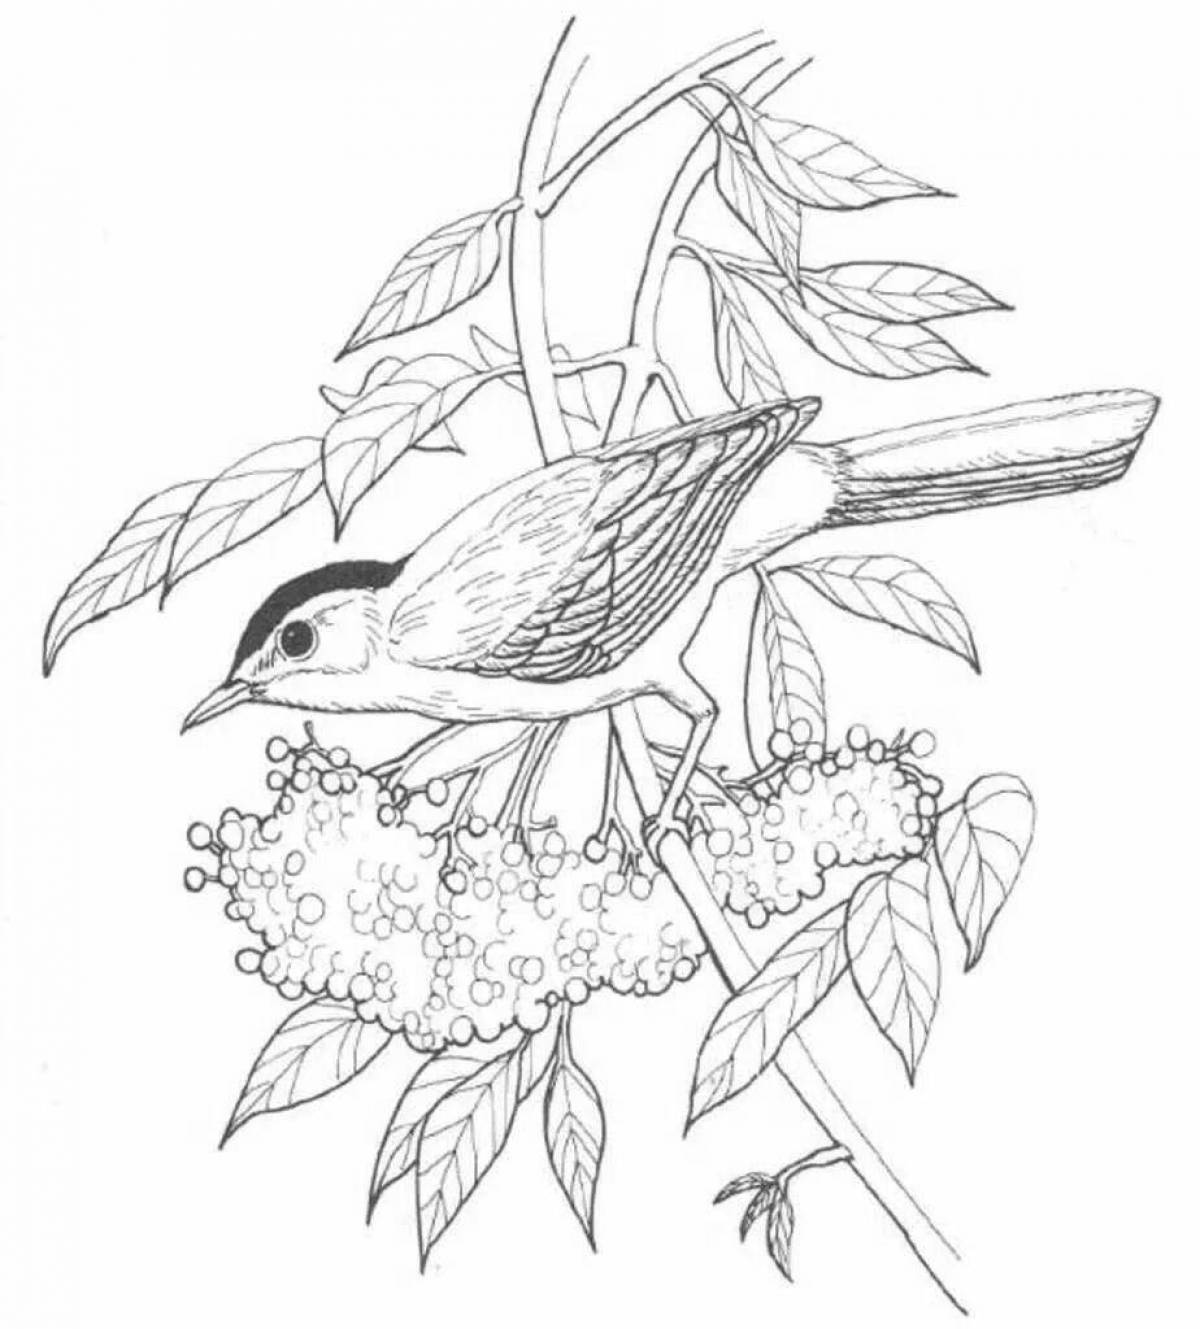 A fun nightingale coloring book for kids